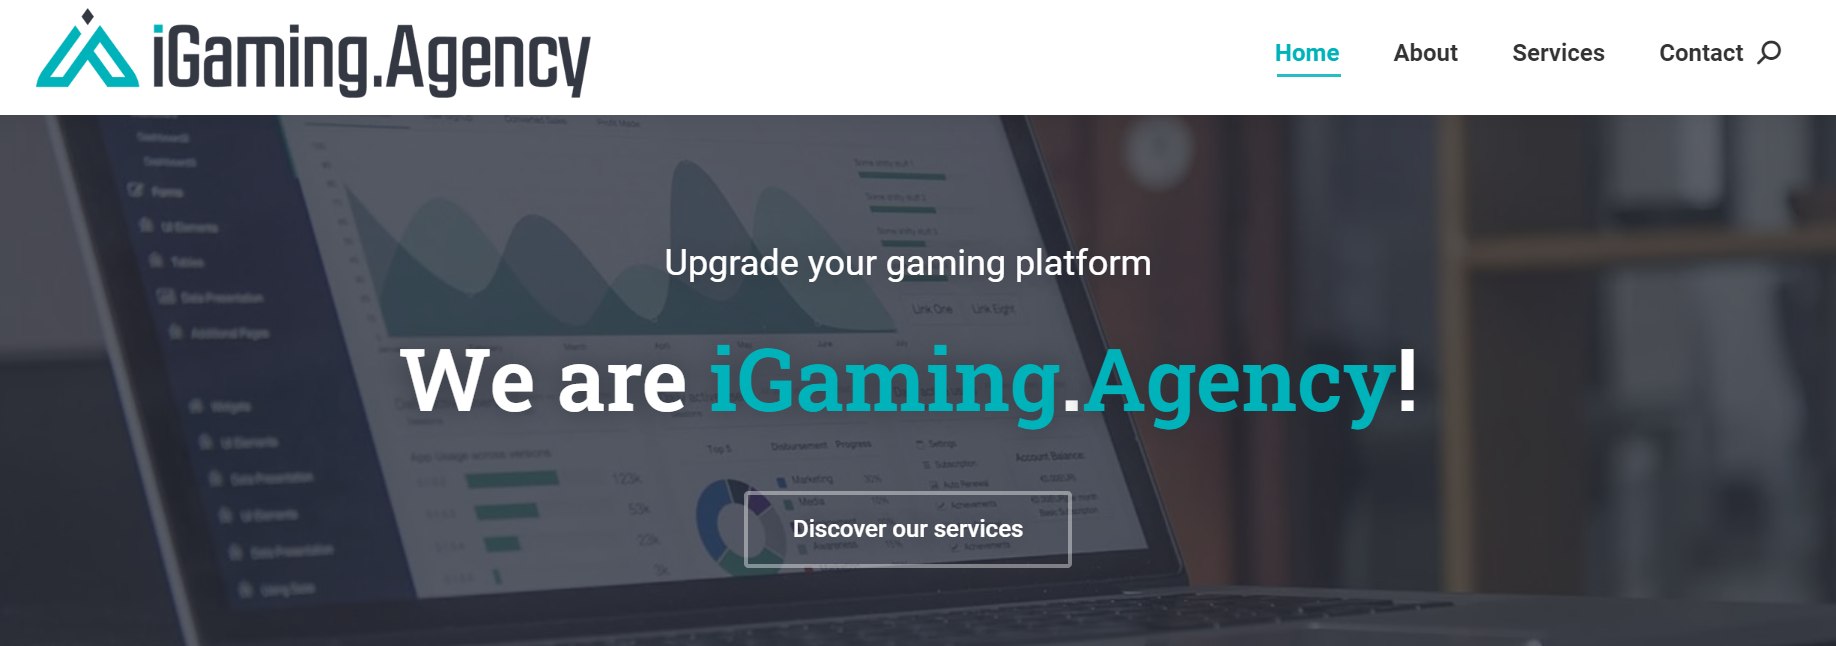  iGaming-Agency